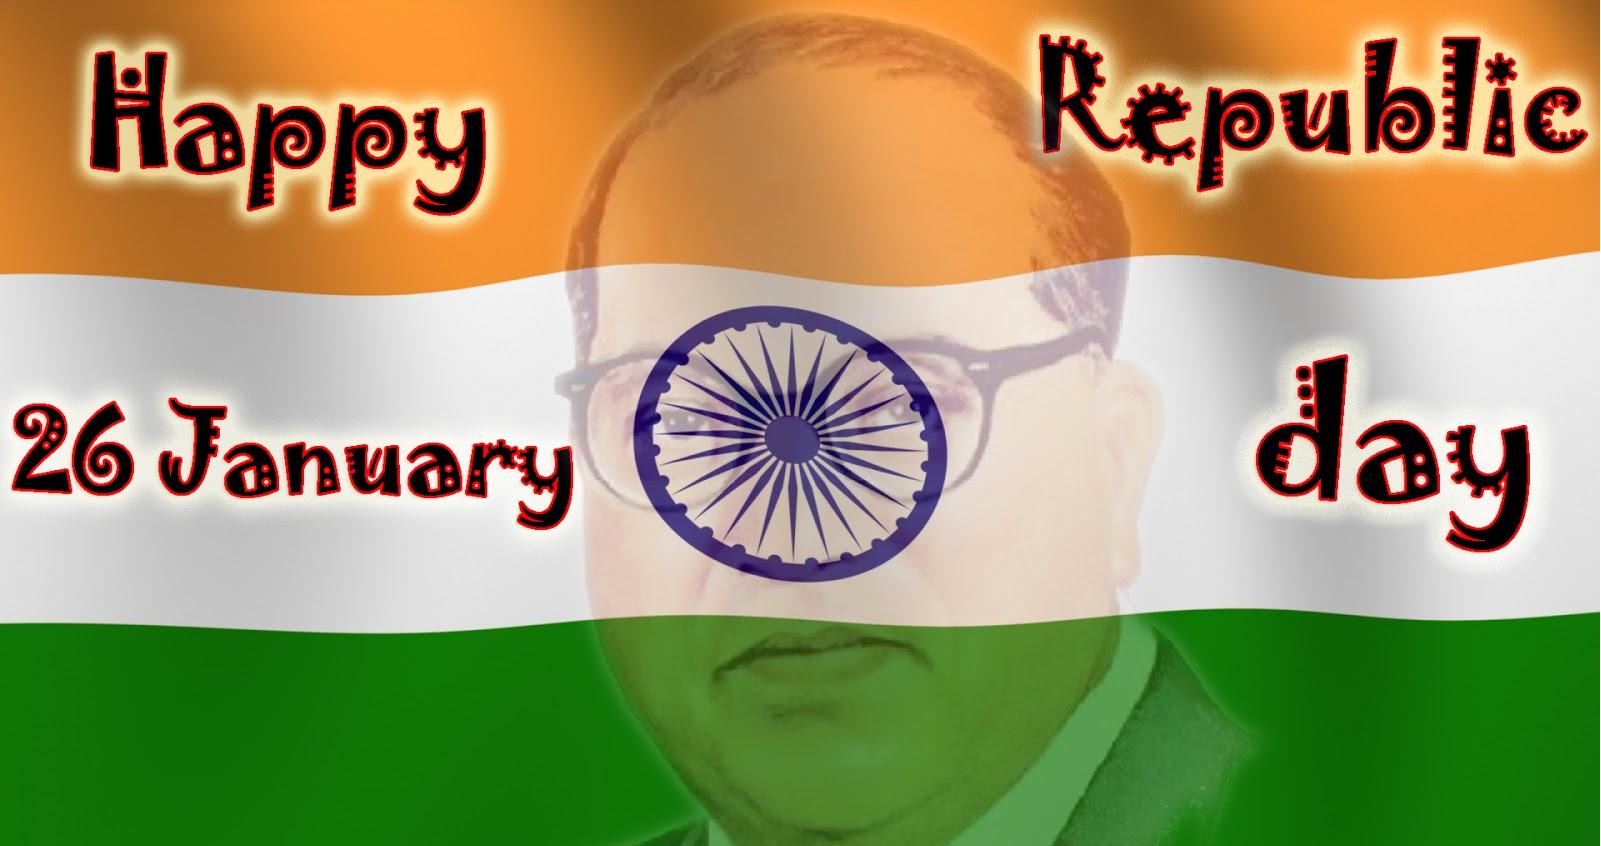 26th january is india's